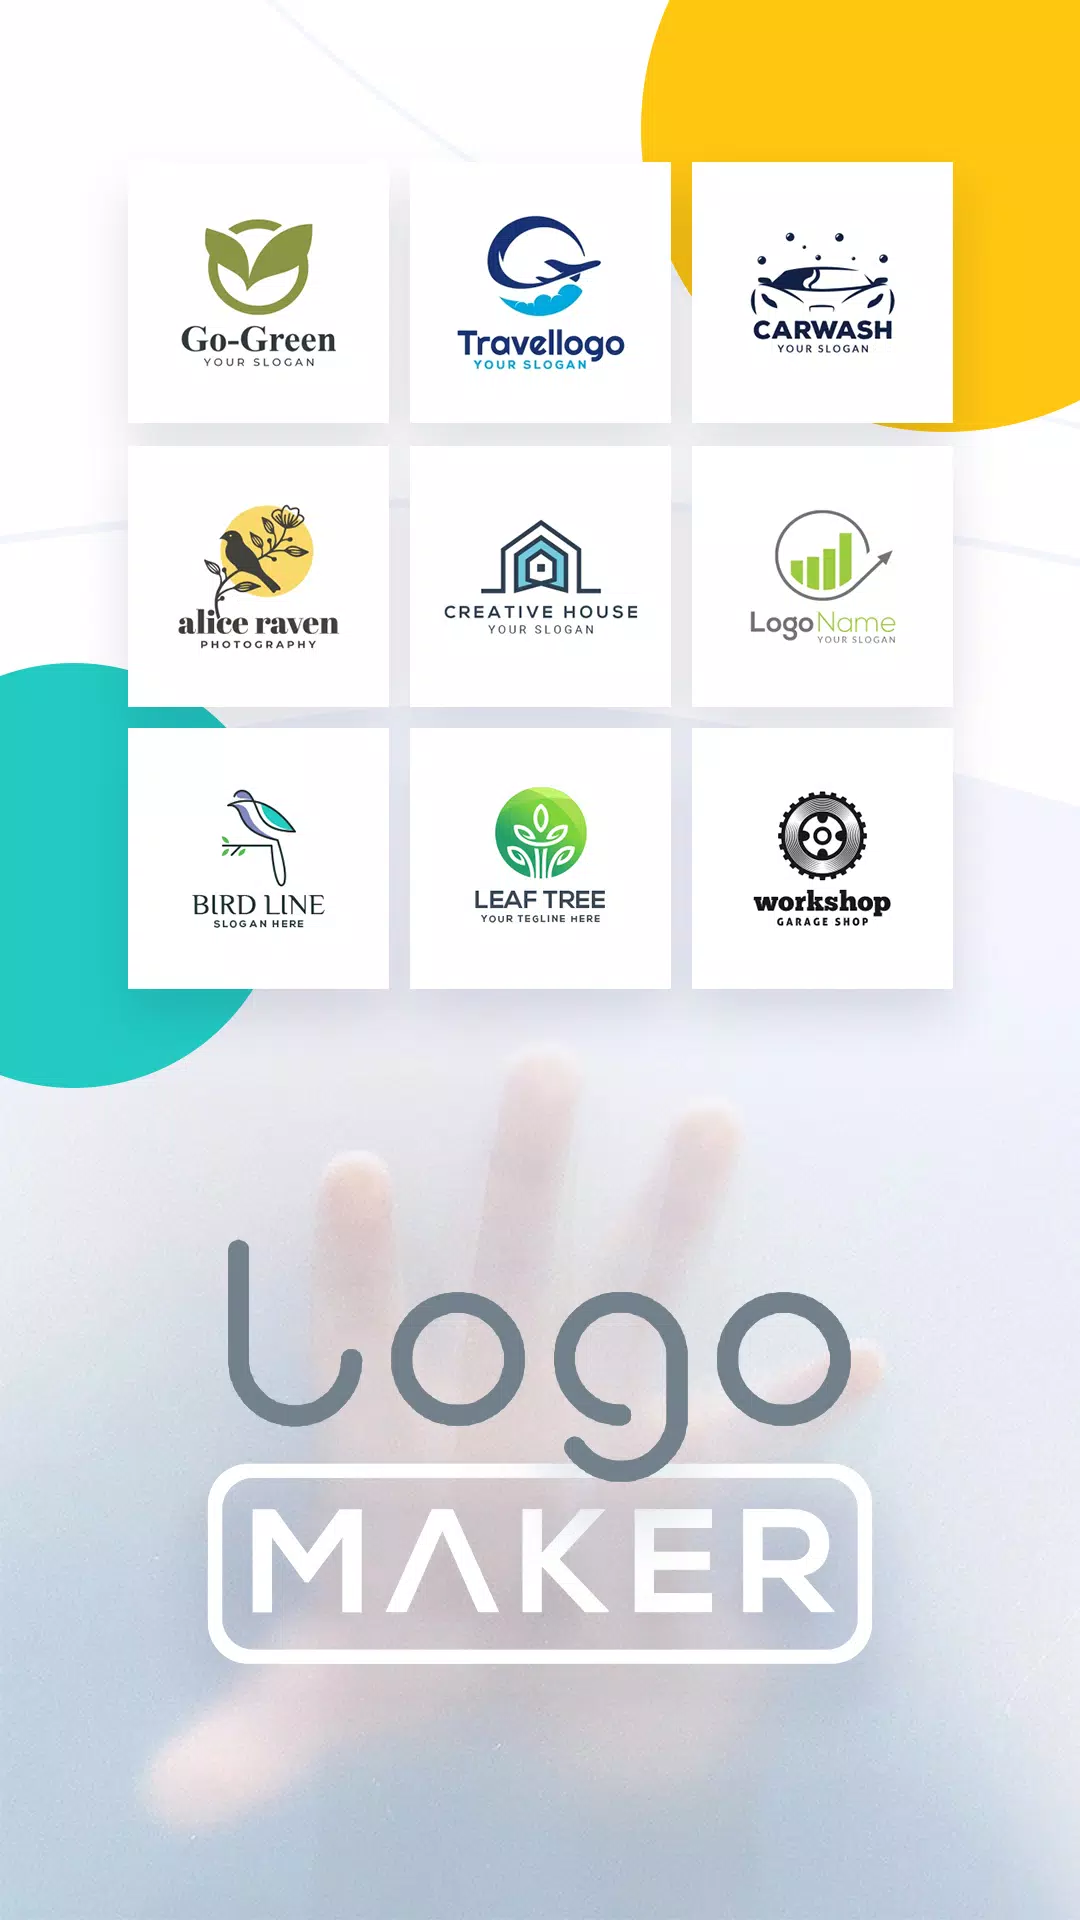 P M Creation Logo Design On Android, How to make logo in Mobile, Graphic  Design